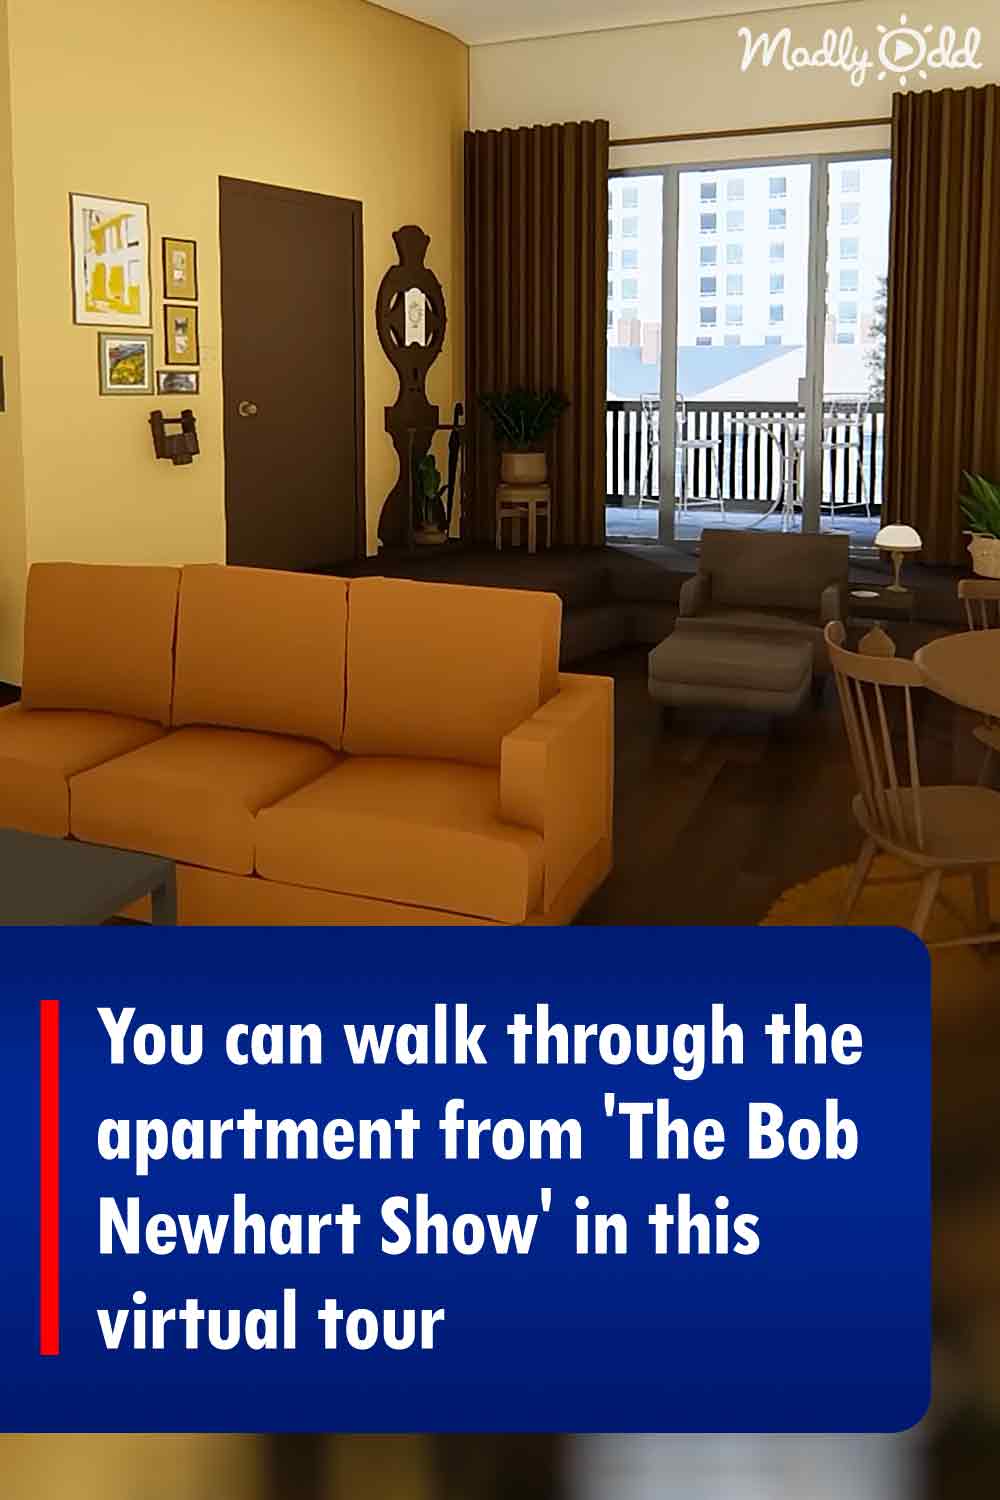 You can walk through the apartment from \'The Bob Newhart Show\' in this virtual tour